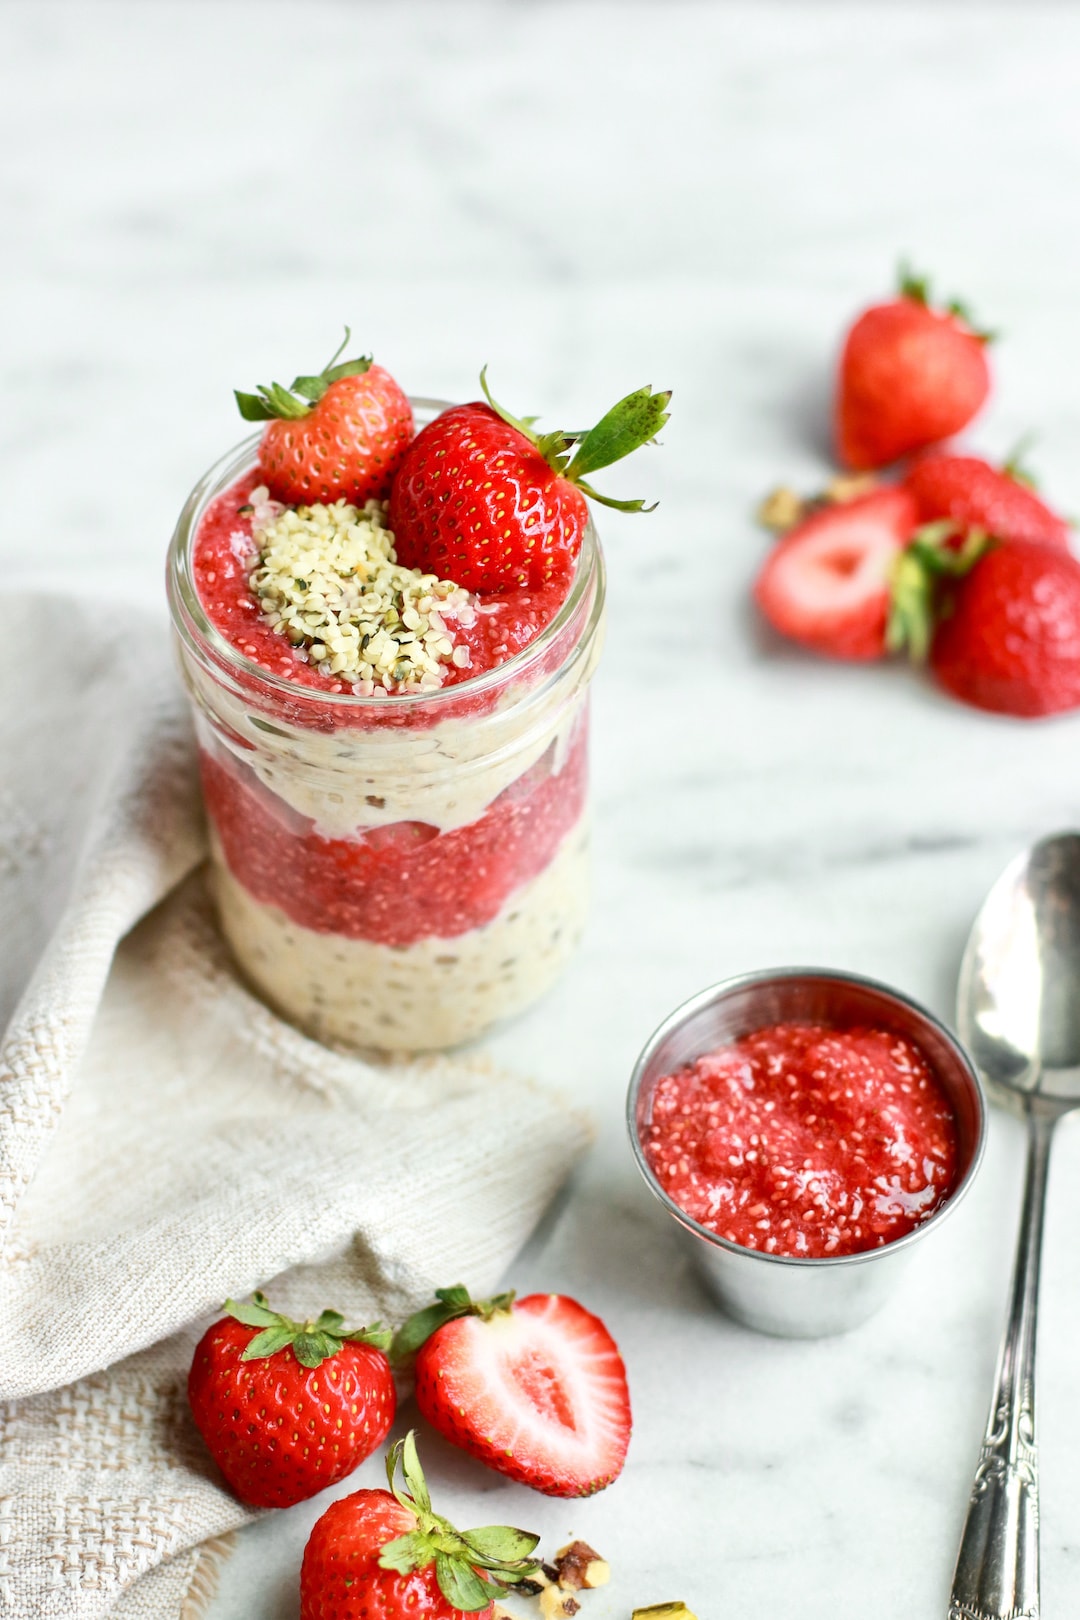 Healthy Strawberry Overnight Oats with Strawberry Easy Chia Seed Jam